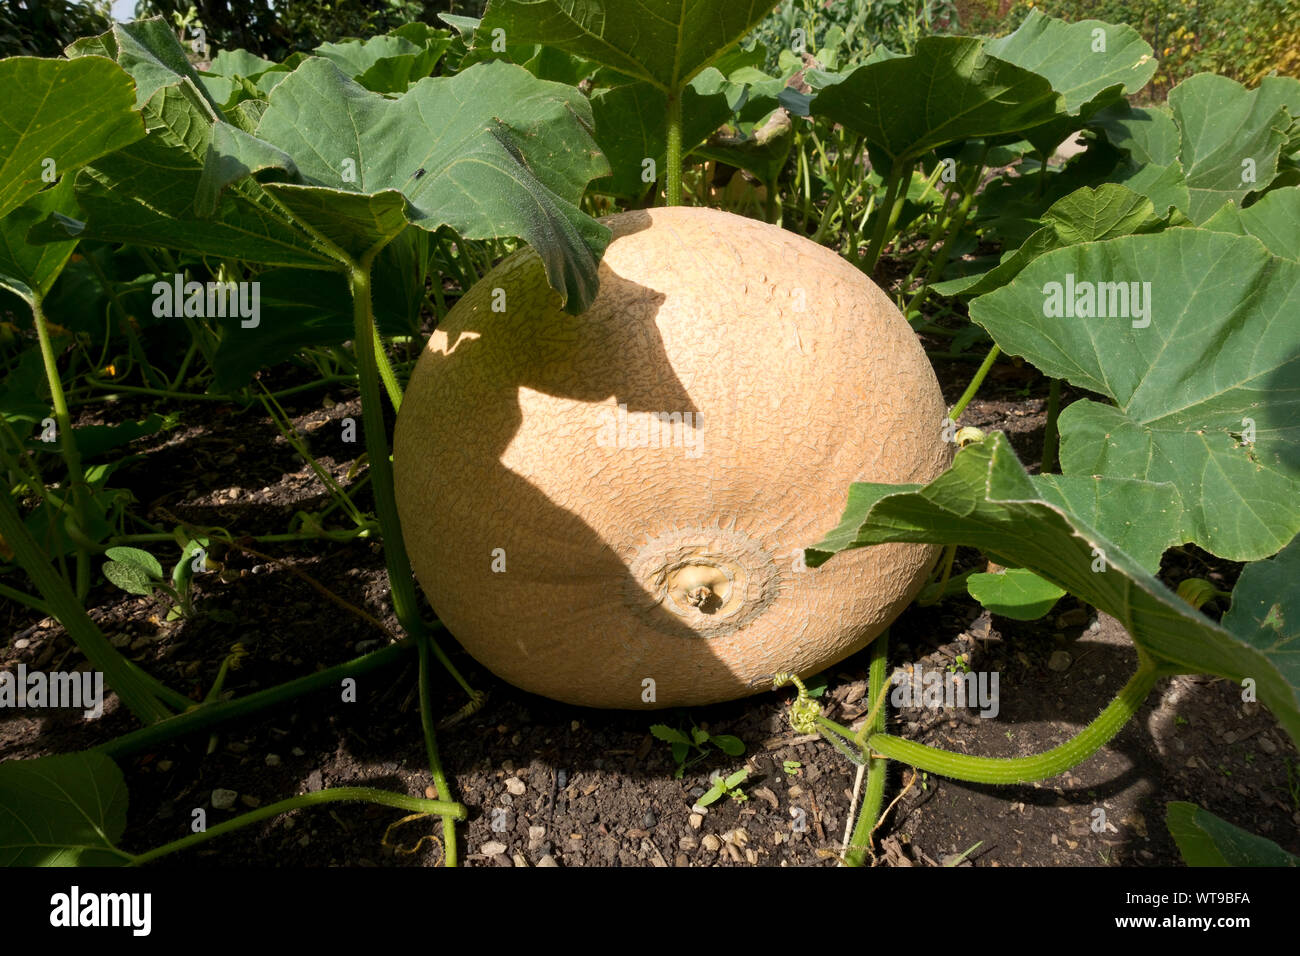 Close up of large pumpkin plant growing in a garden in summer England UK United Kingdom GB Great Britain Stock Photo